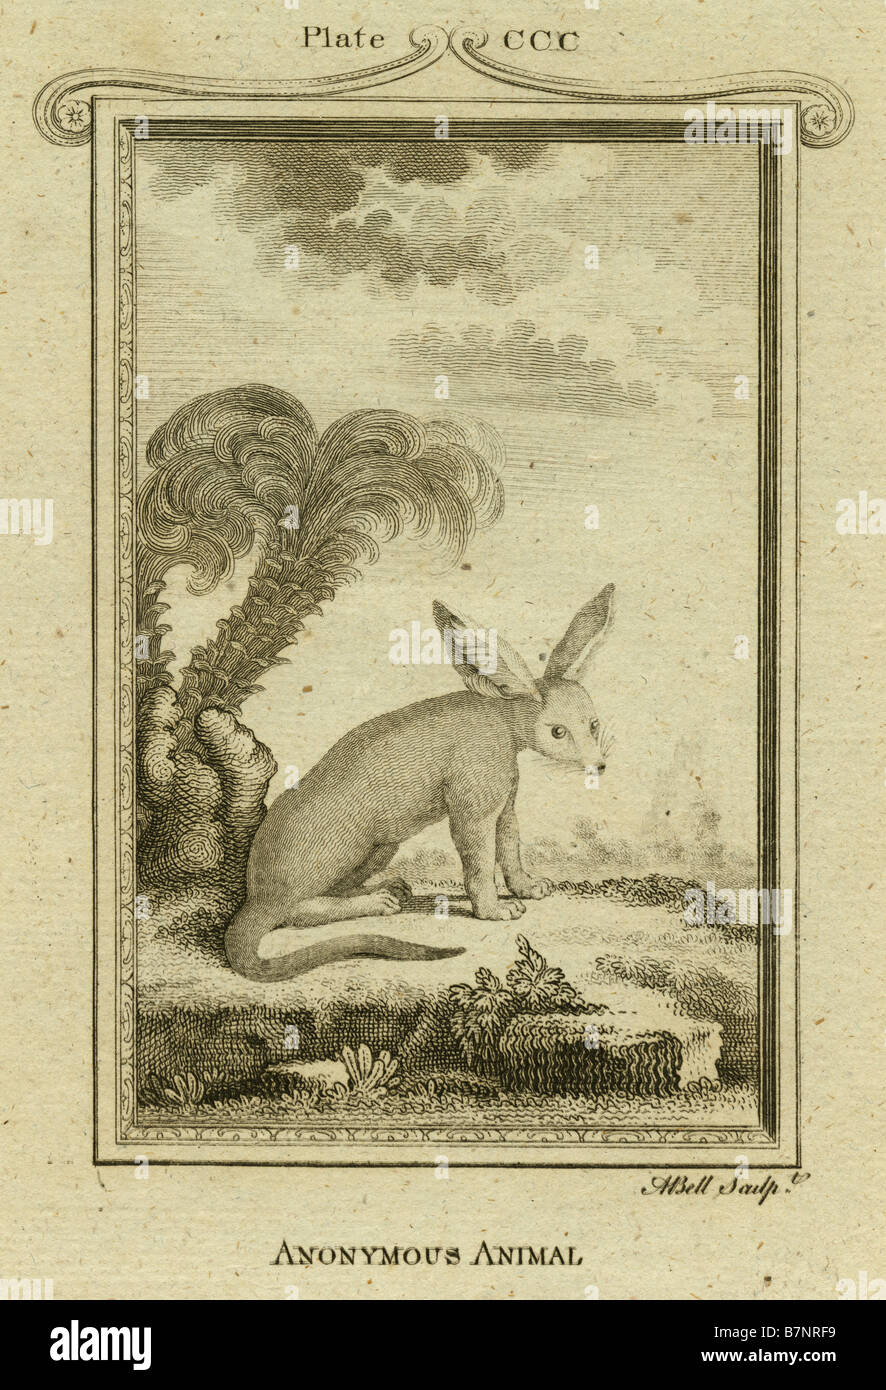 Circa 1770s engraving of an 'Anonymous Animal,' possibly mythological. from a book on animals. Stock Photo